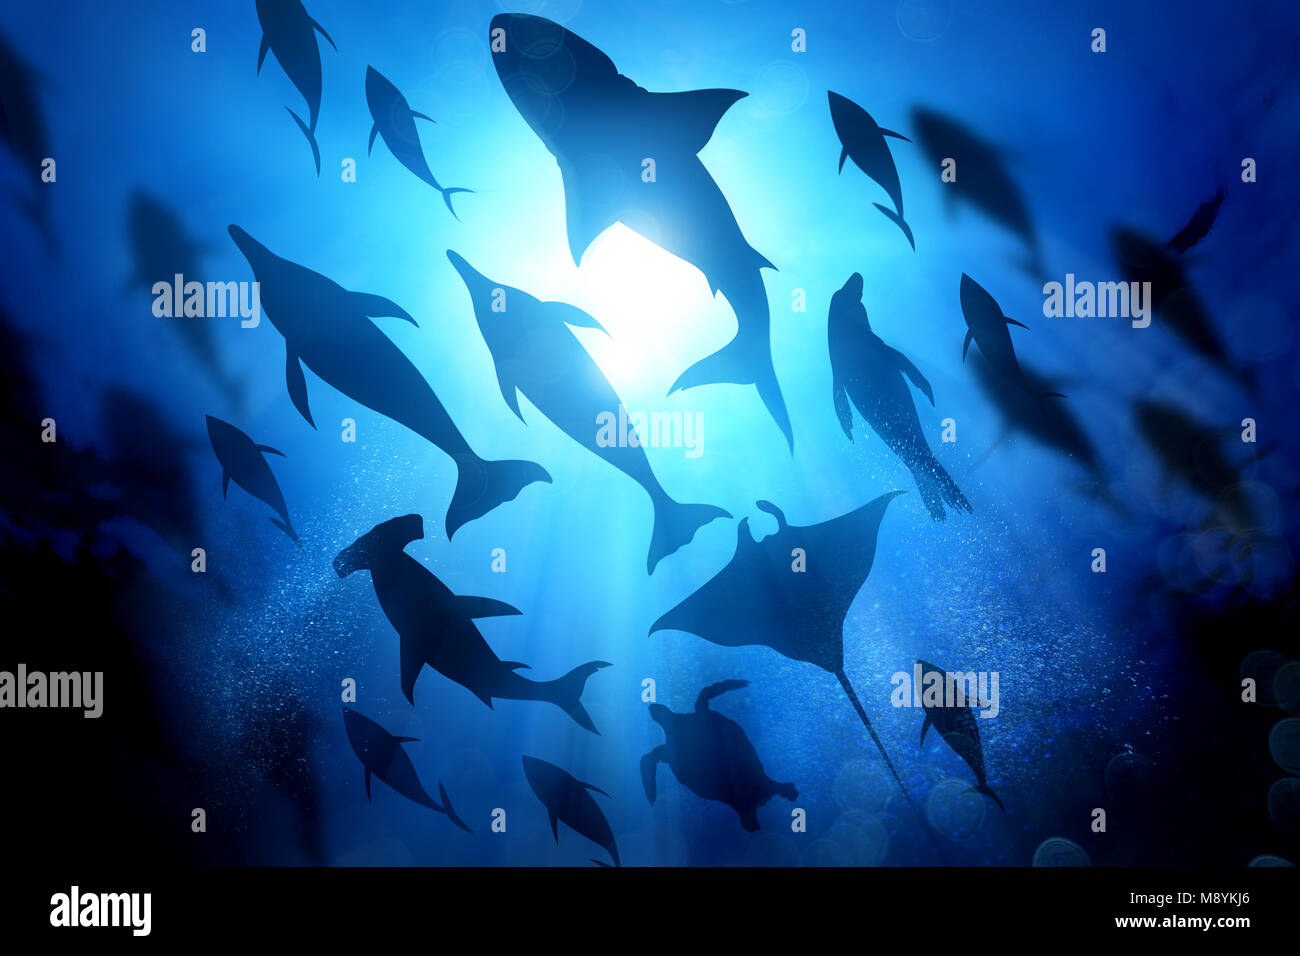 A variety of marine and ocean life silhouettes under the waves including salt water Dolphins, sharks and fish. Mixed media illustration. Stock Photo